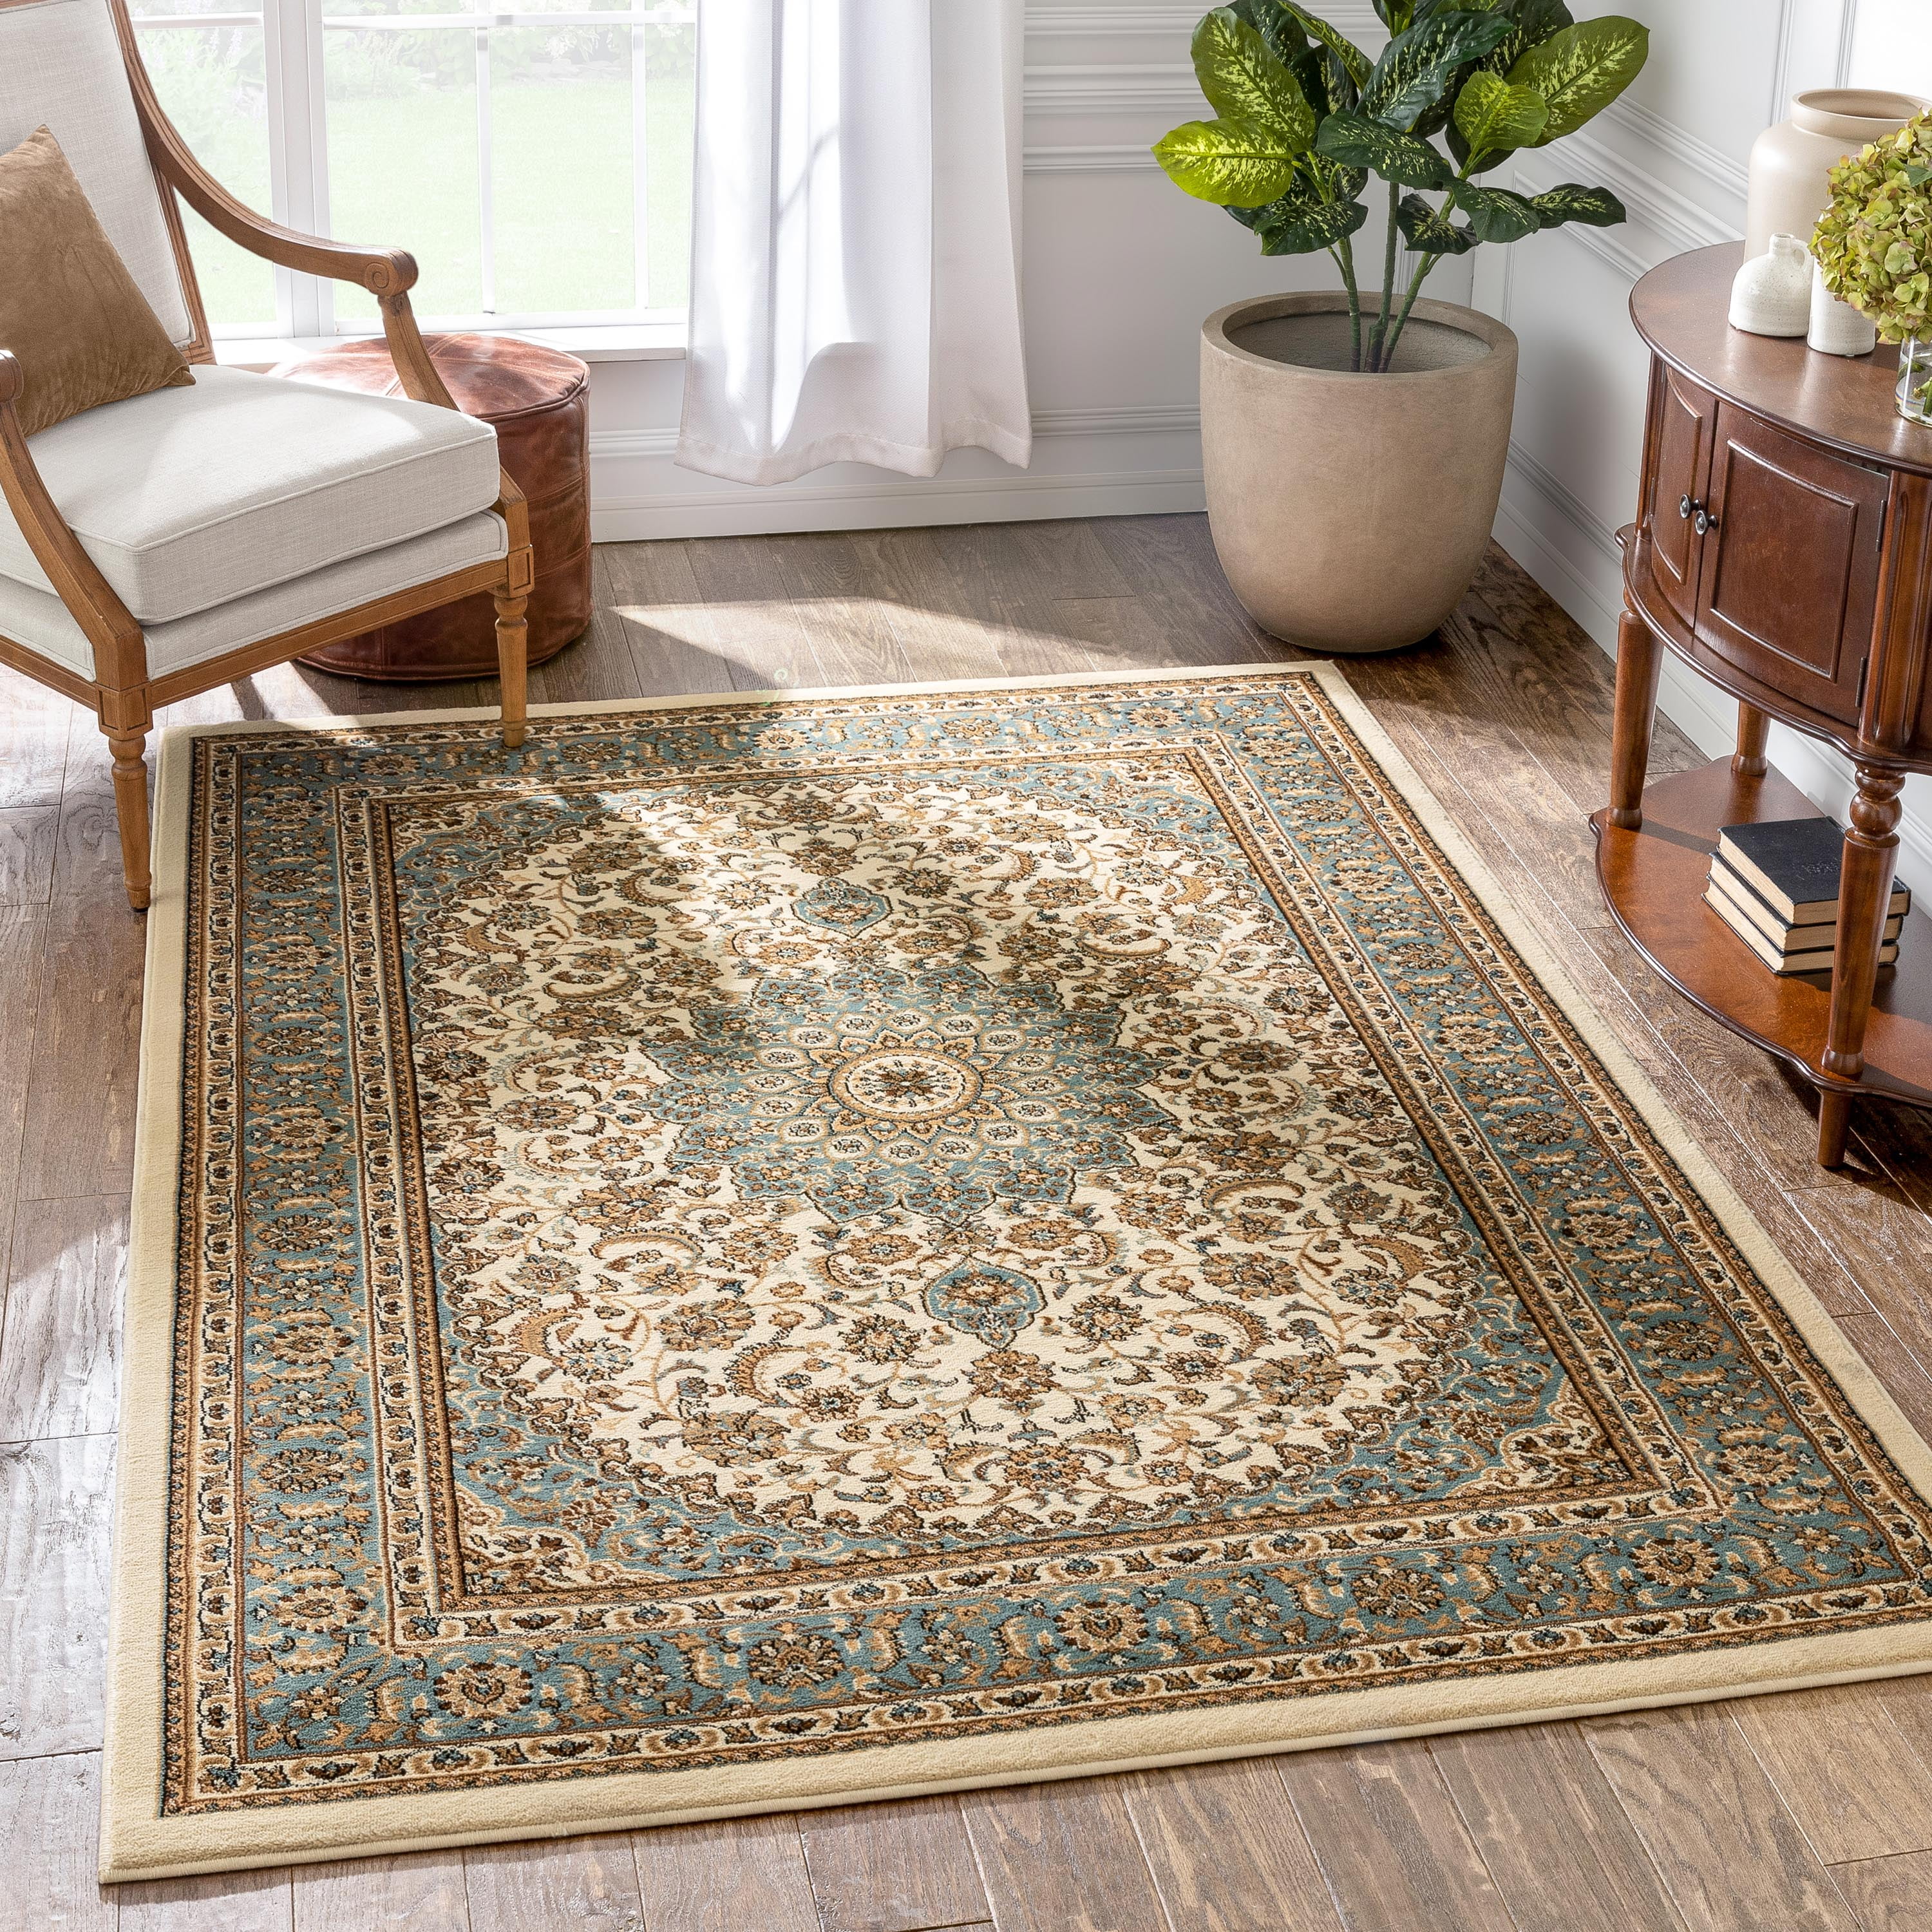 Machin Washable GOLD COLOUR  Traditional Persian Oriental design RUG NOW 25% OFF 